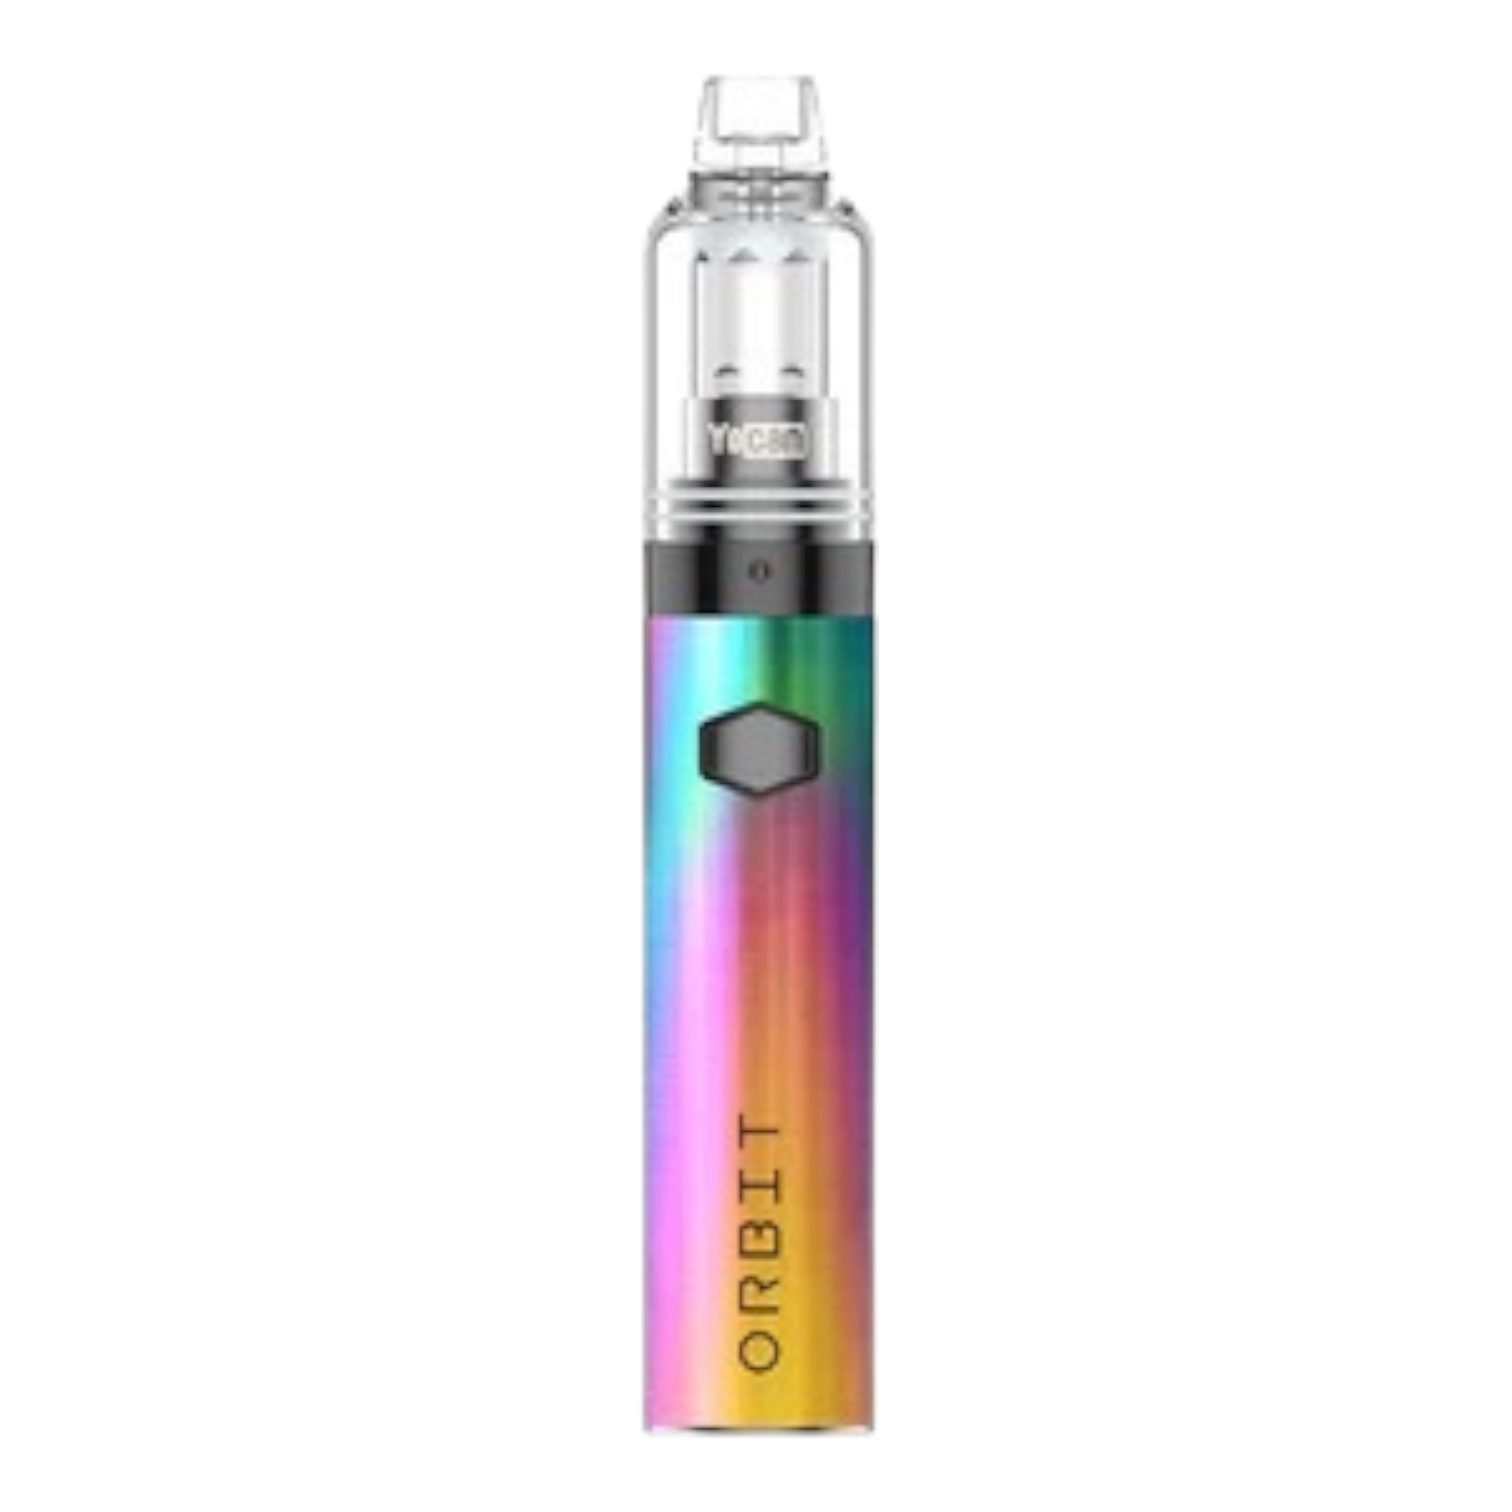 YoCan Wulf - Orbit Concentrate Vaporizer - Full Color